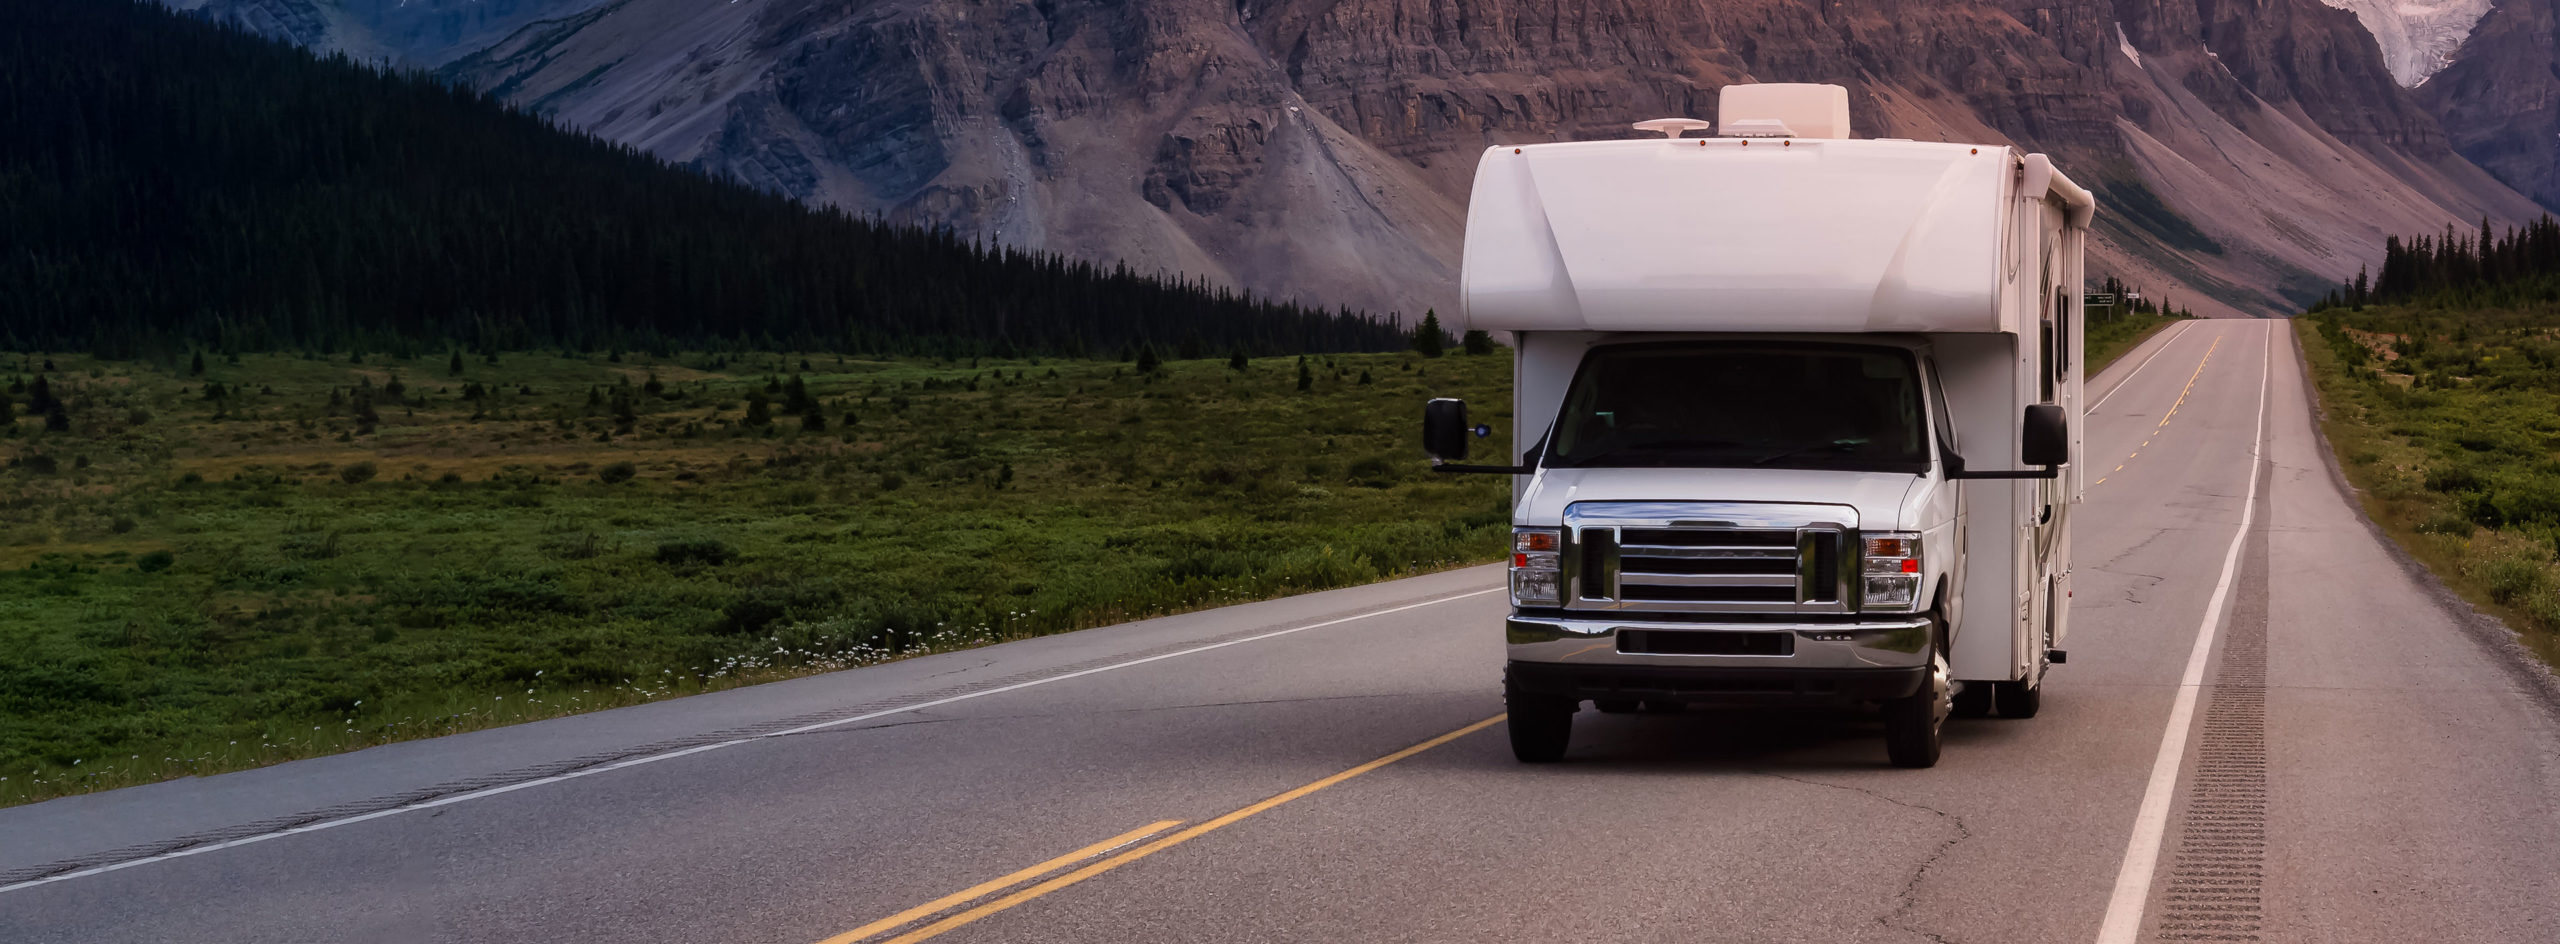 RV driving on a road with mountains